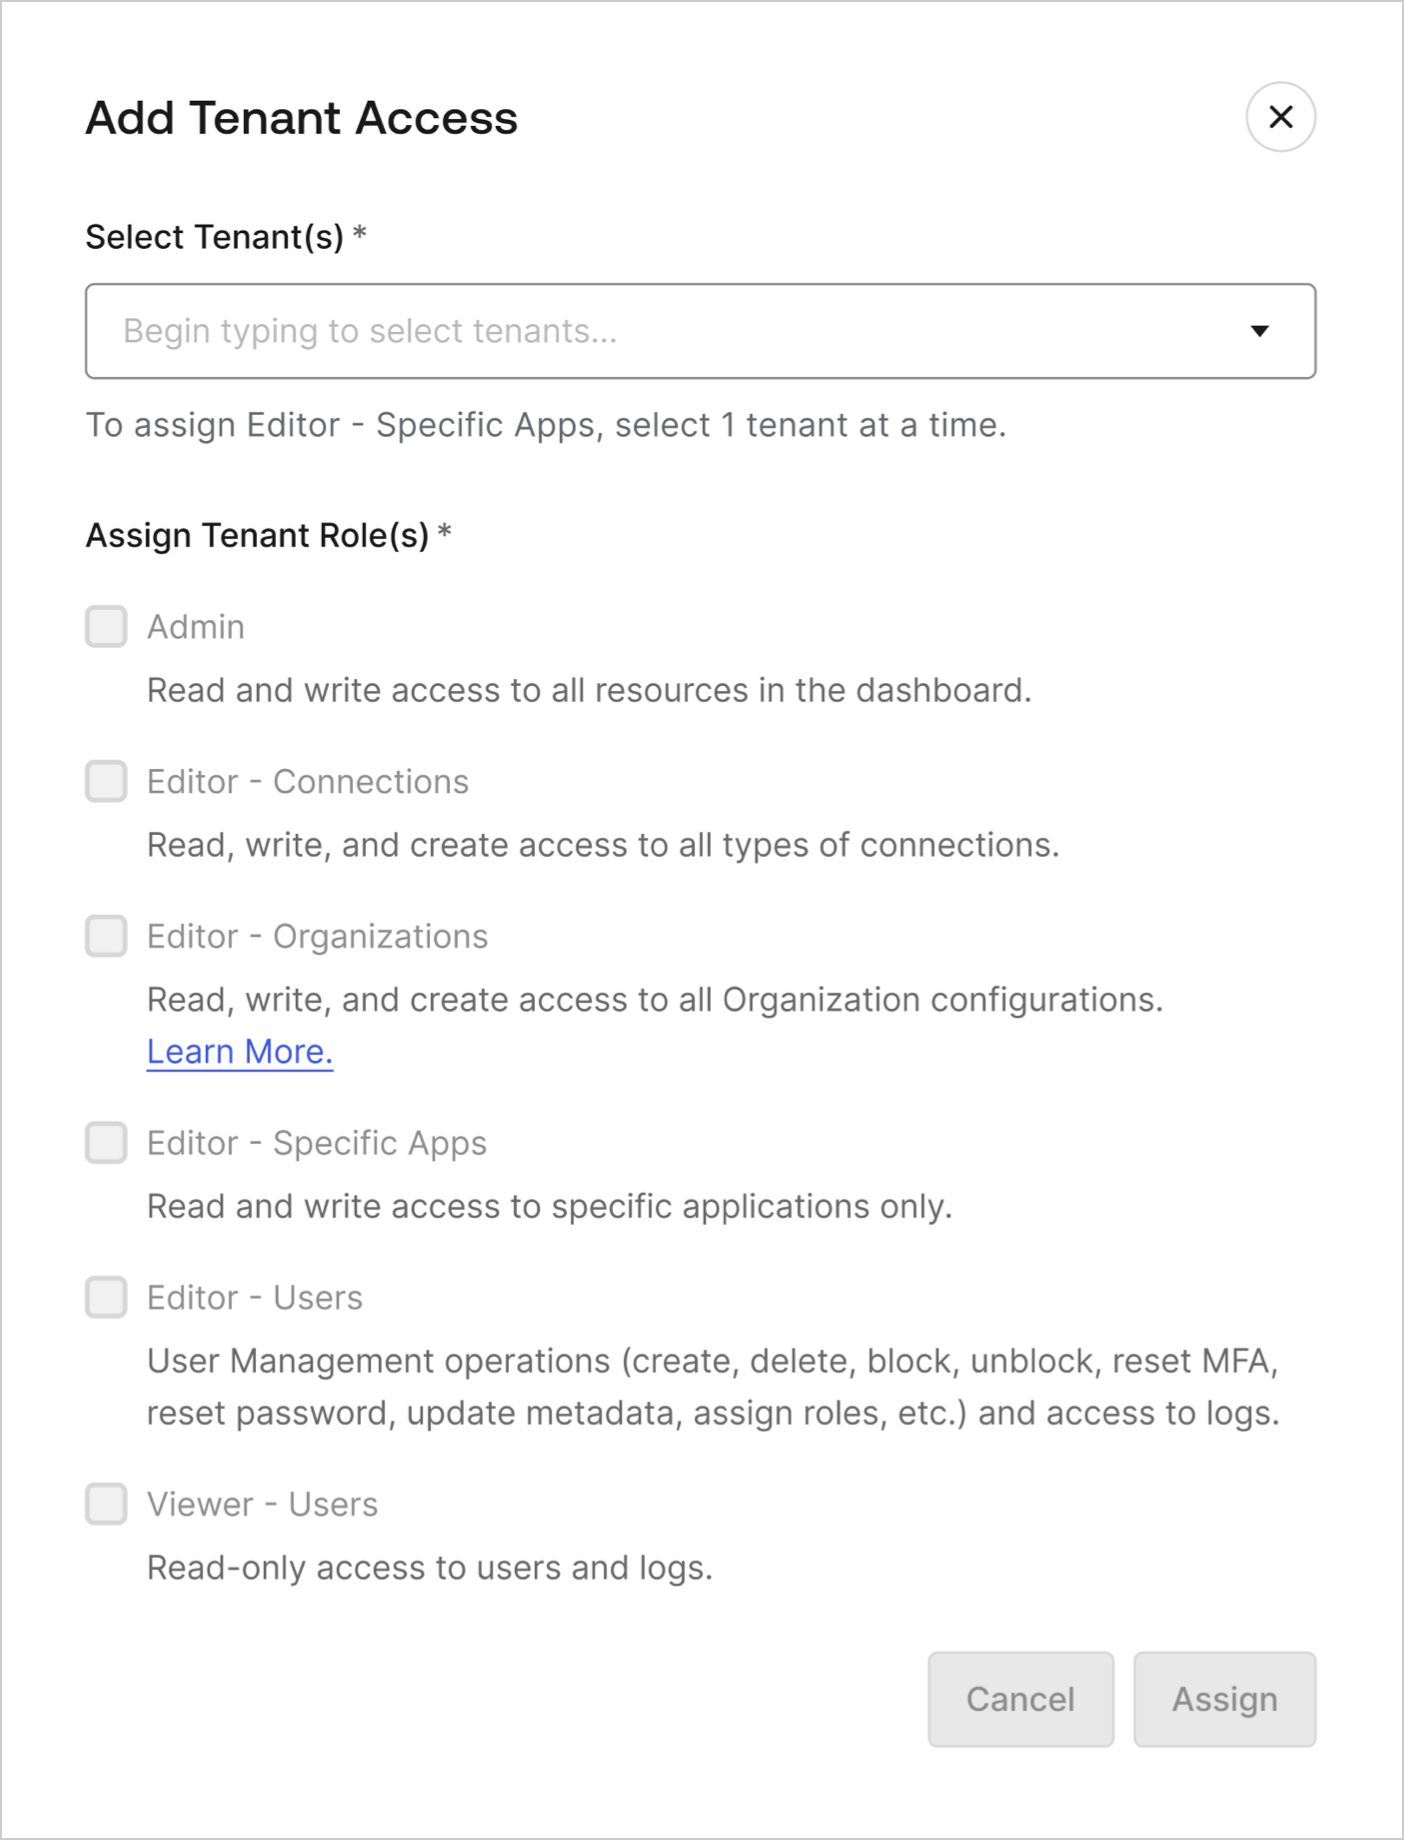 Modal to assign Tenant Access to the Selected Member